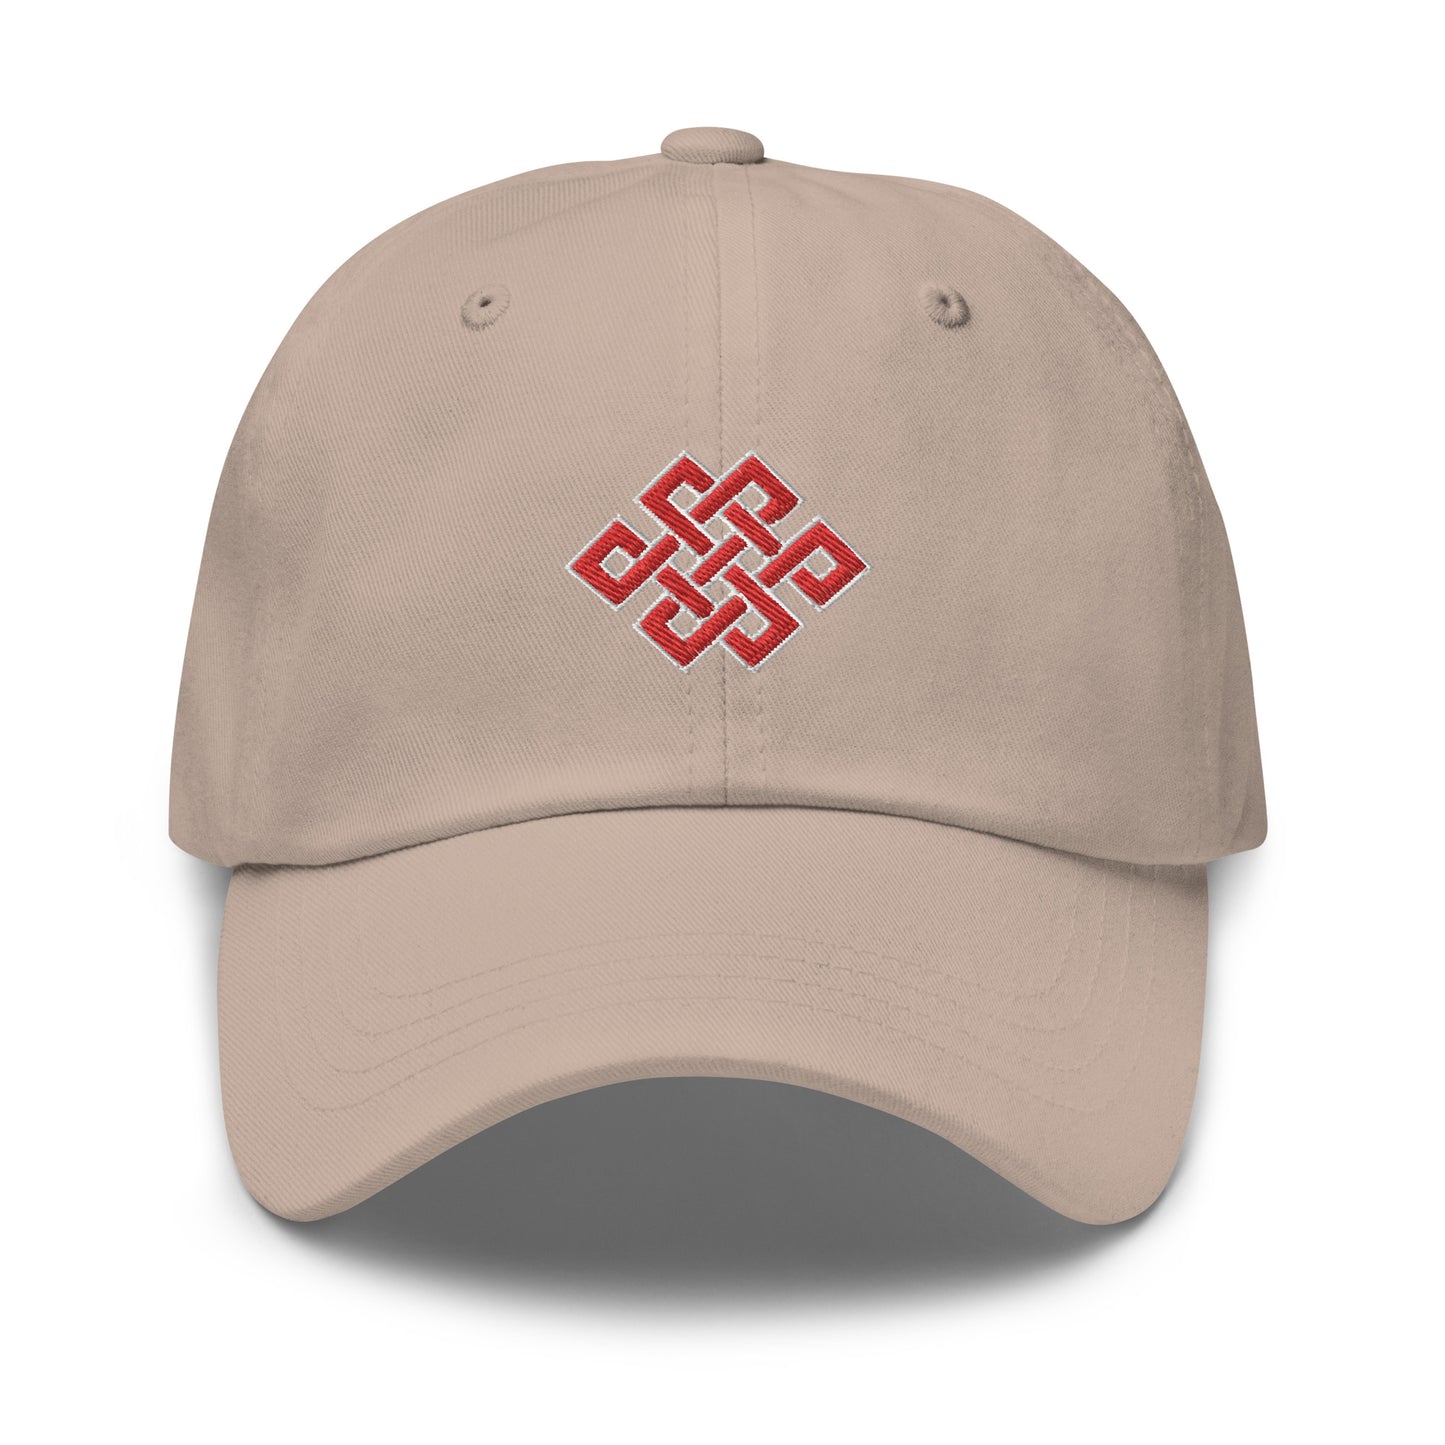 PATA HATS are curated and designed under Dzimig Studios' Tibet Archive Project. The hats come in various colors to match your style and sits on your head just like a crown. Each hat are embroidered with Tibetan pata symbol.